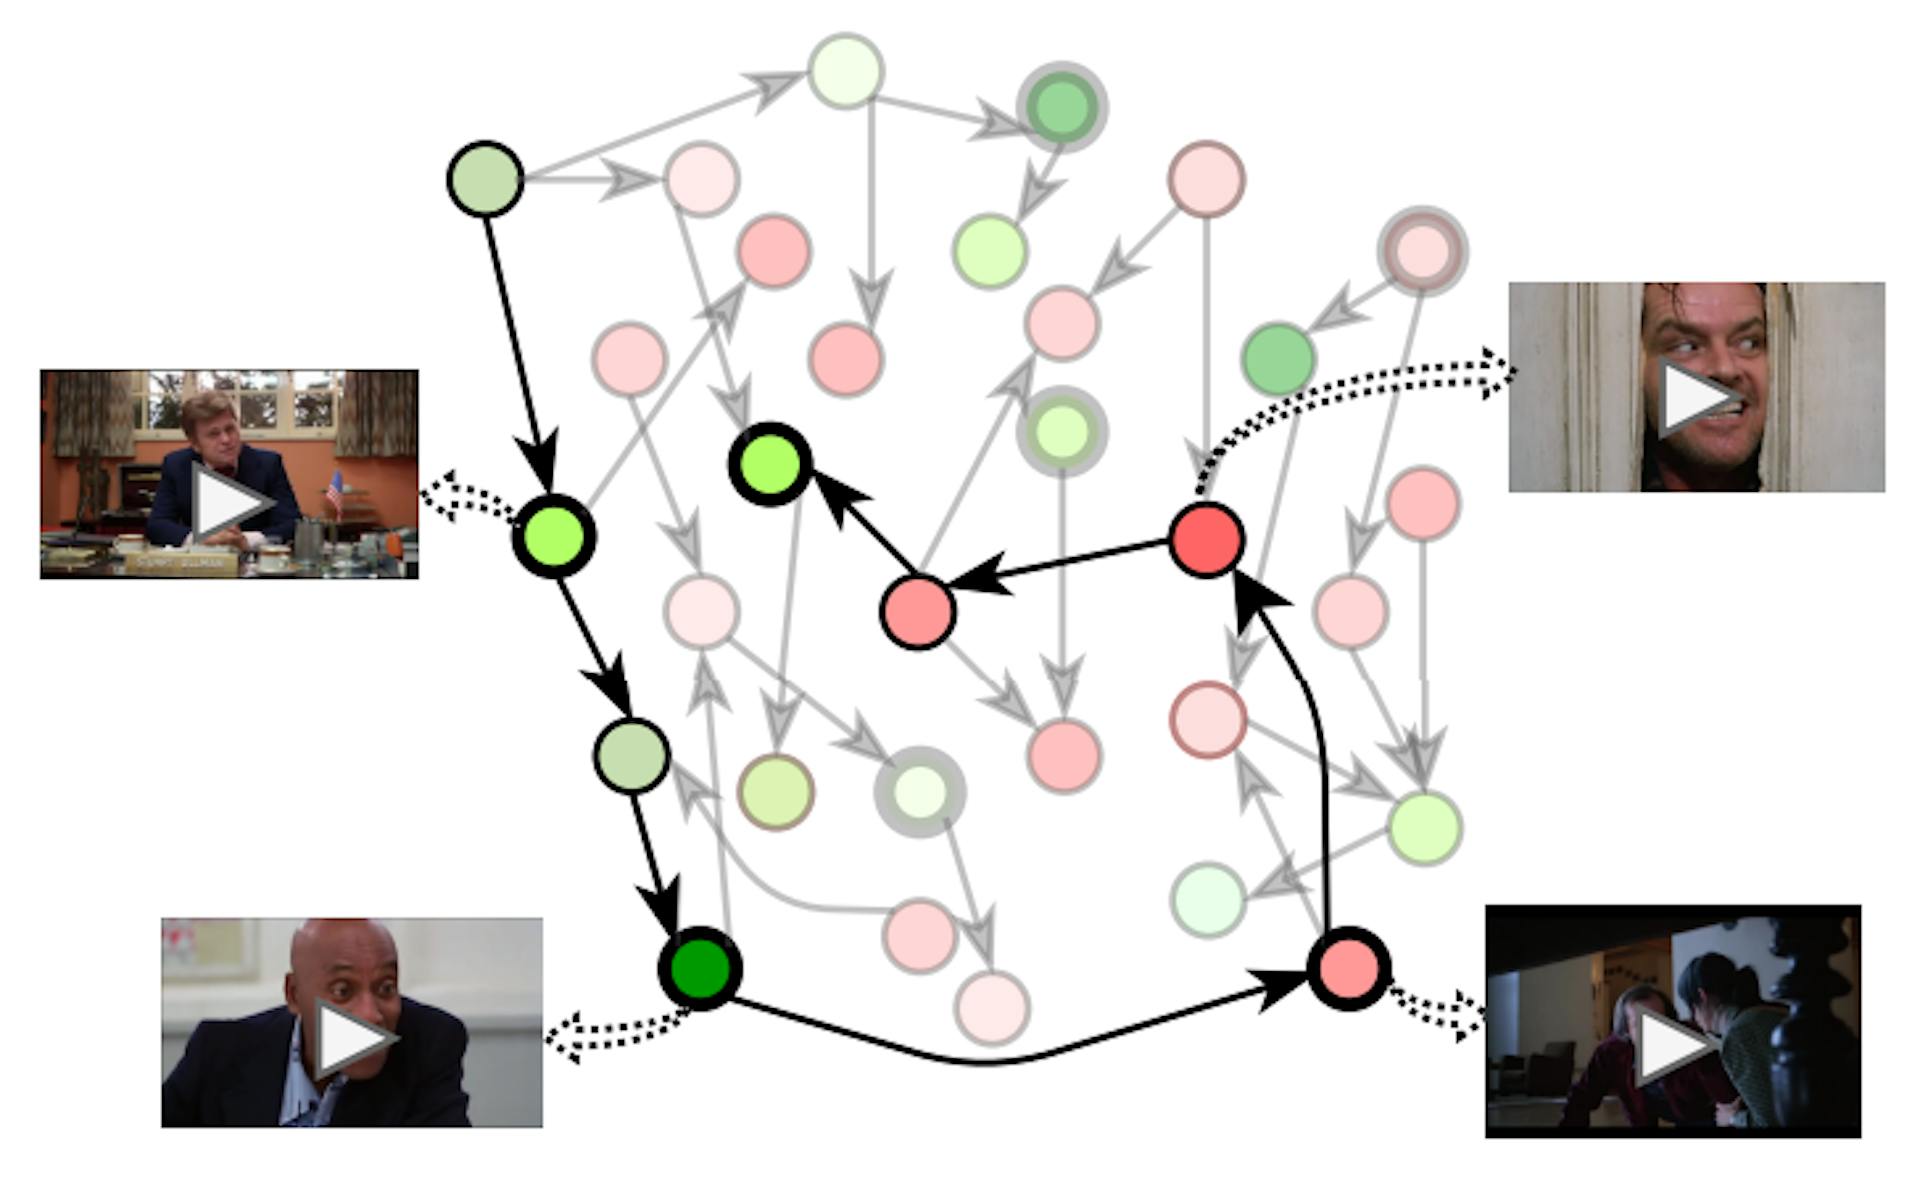 Figure 2. GRAPHTRAILER: a movie is a graph whose nodes are shots and edges denote relations between them. Each shot ischaracterized by a sentiment score (green/red shades for positive/negative values) and labels describing important events (thick circles). Our algorithm performs walks in the graph (bold line) to generate proposal trailer sequences.